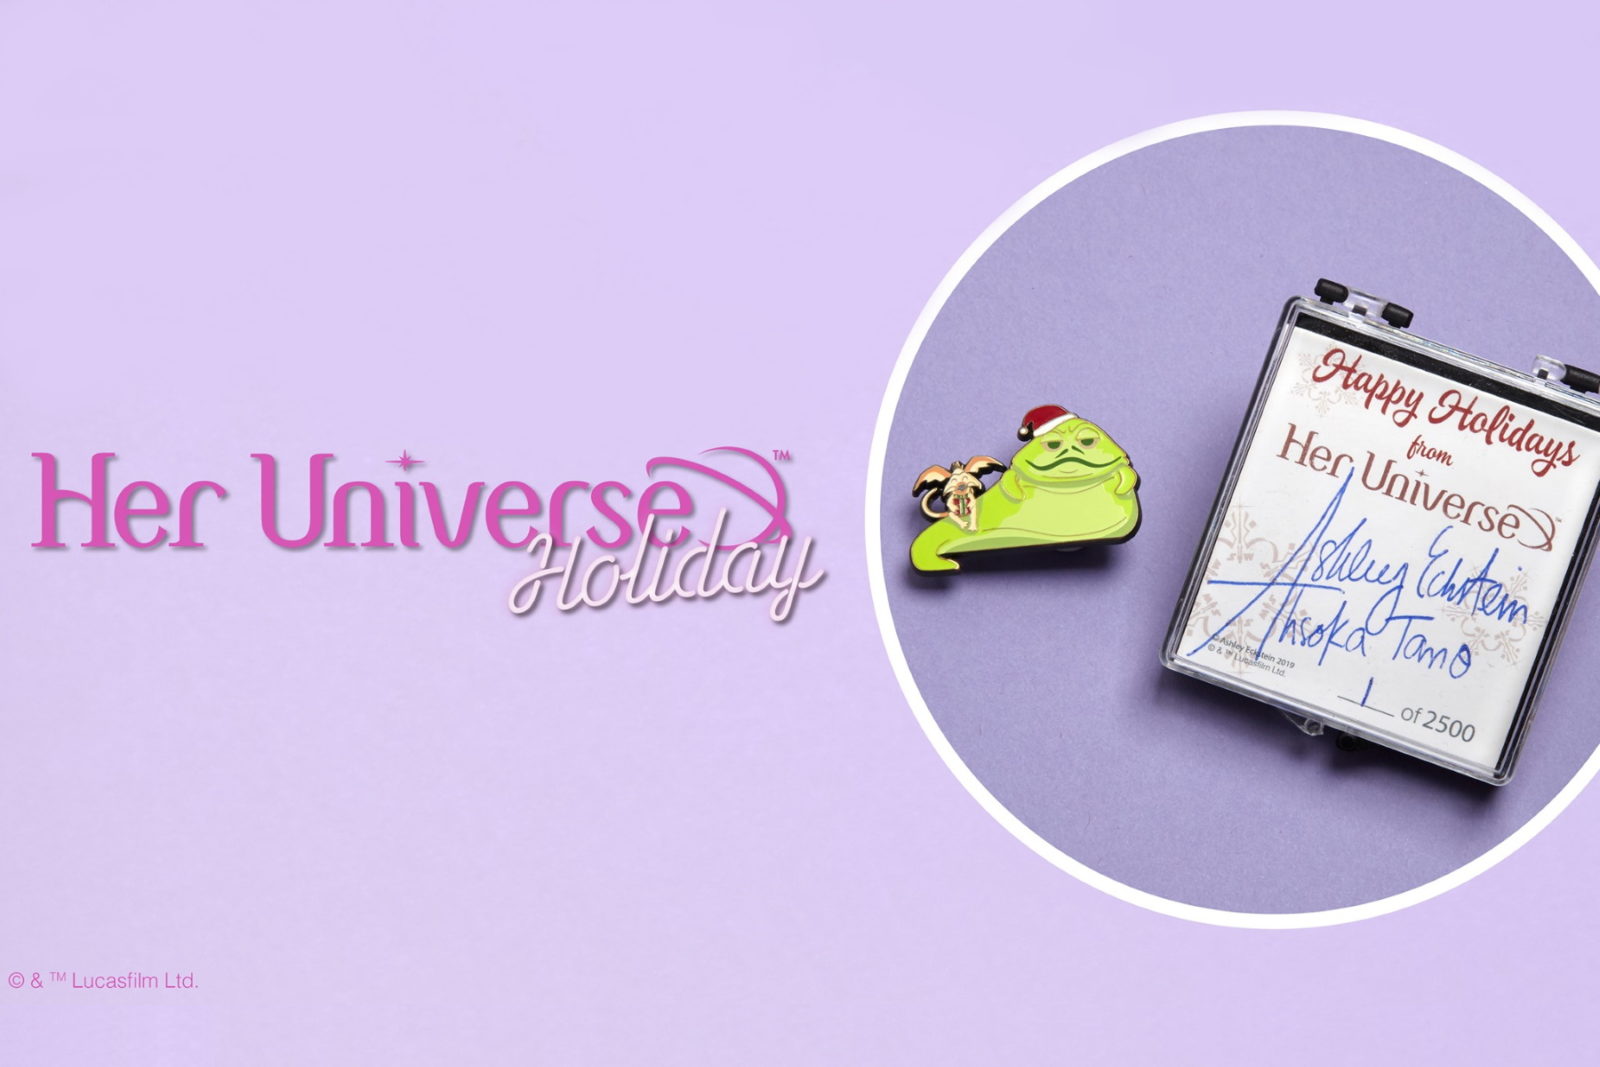 Her Universe Star Wars Holiday Pin 2019